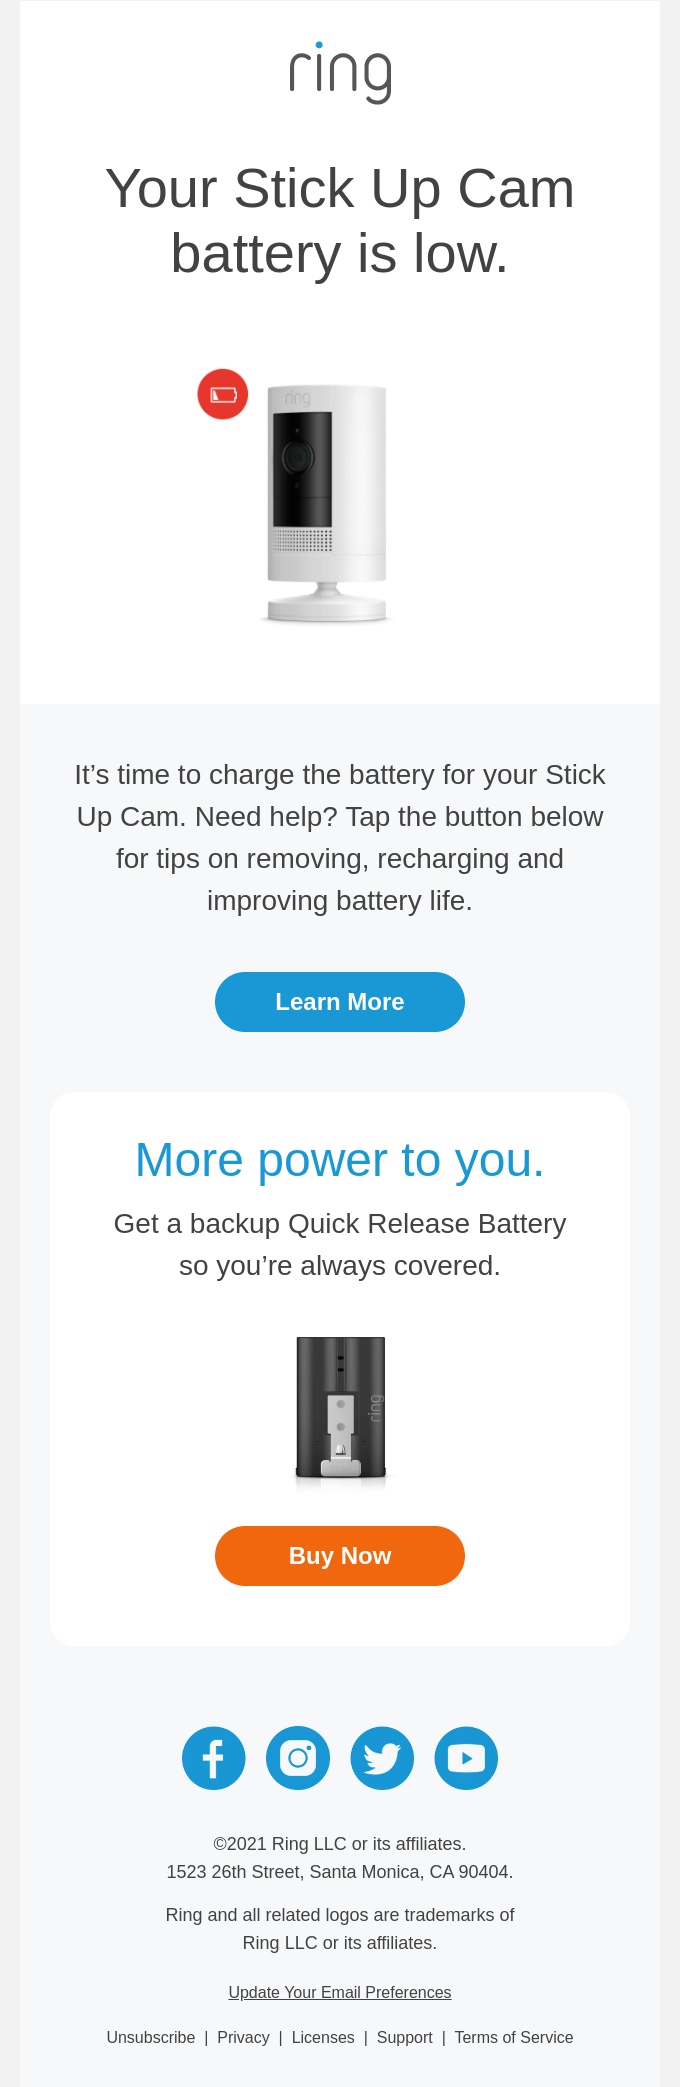 It’s Time to Recharge Your Stick Up Cam